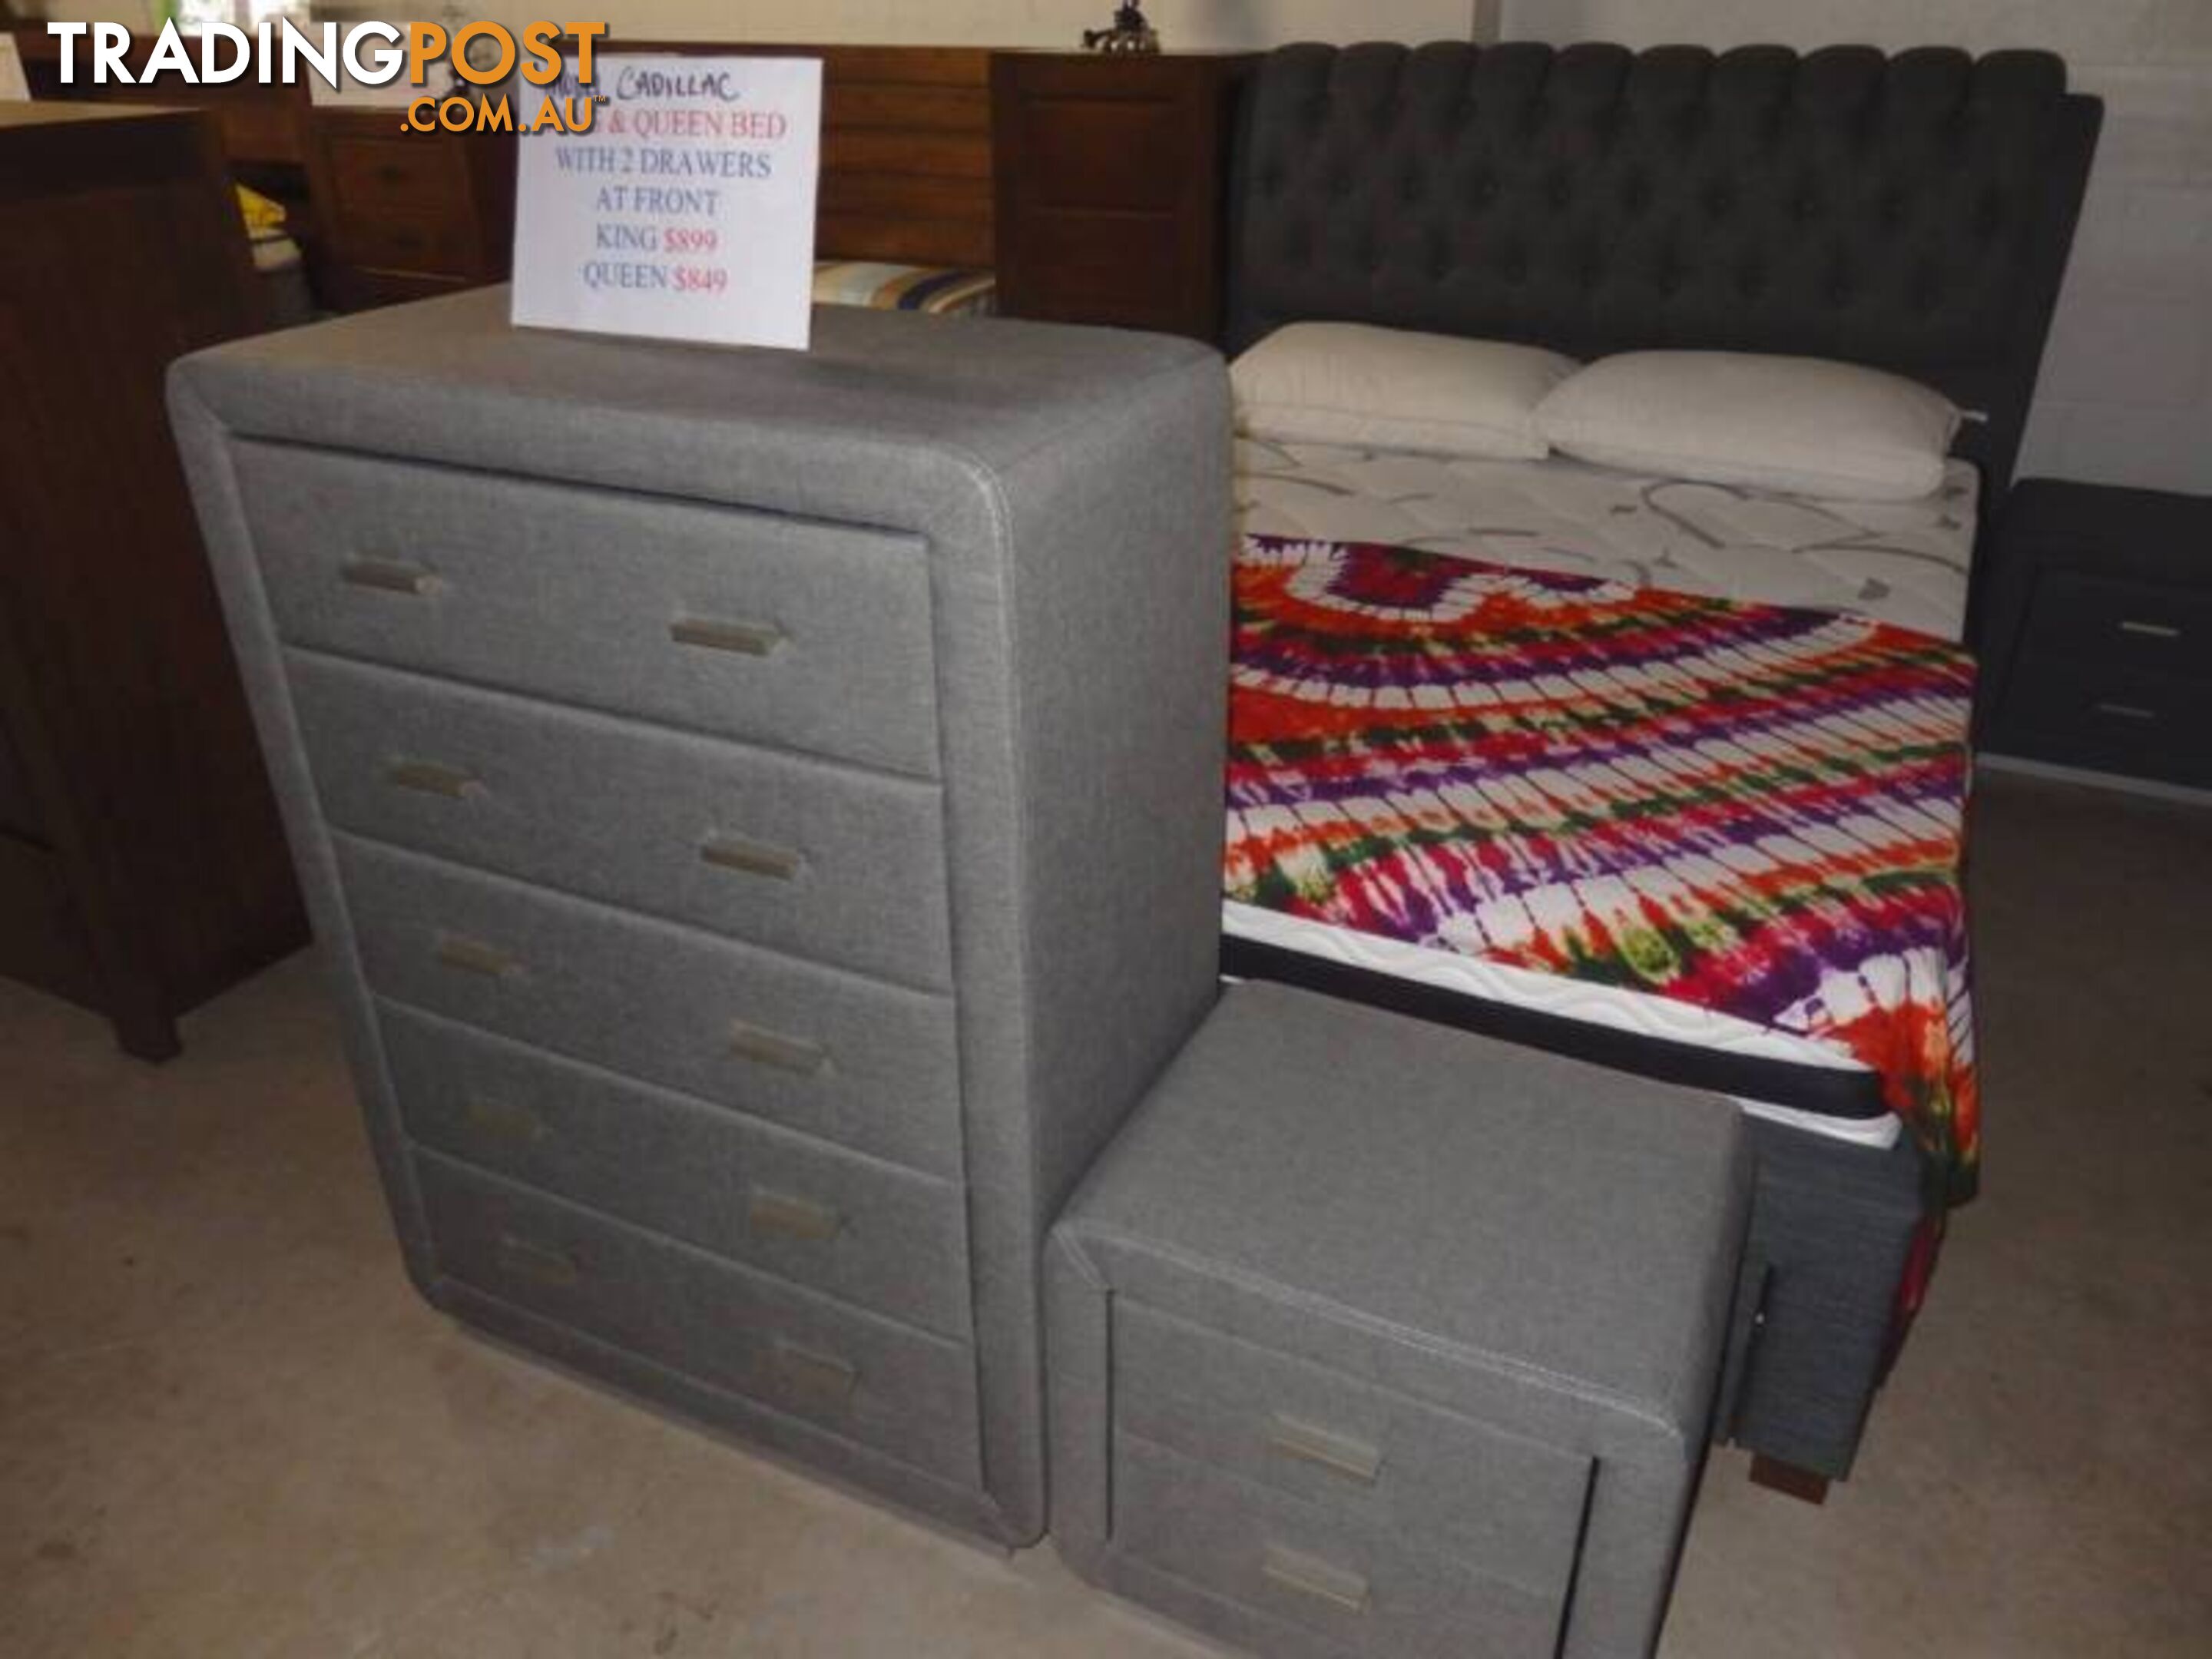 NEW QUEEN BED And King Bed Frame With Drawers. RENT KEEP $12.90PW